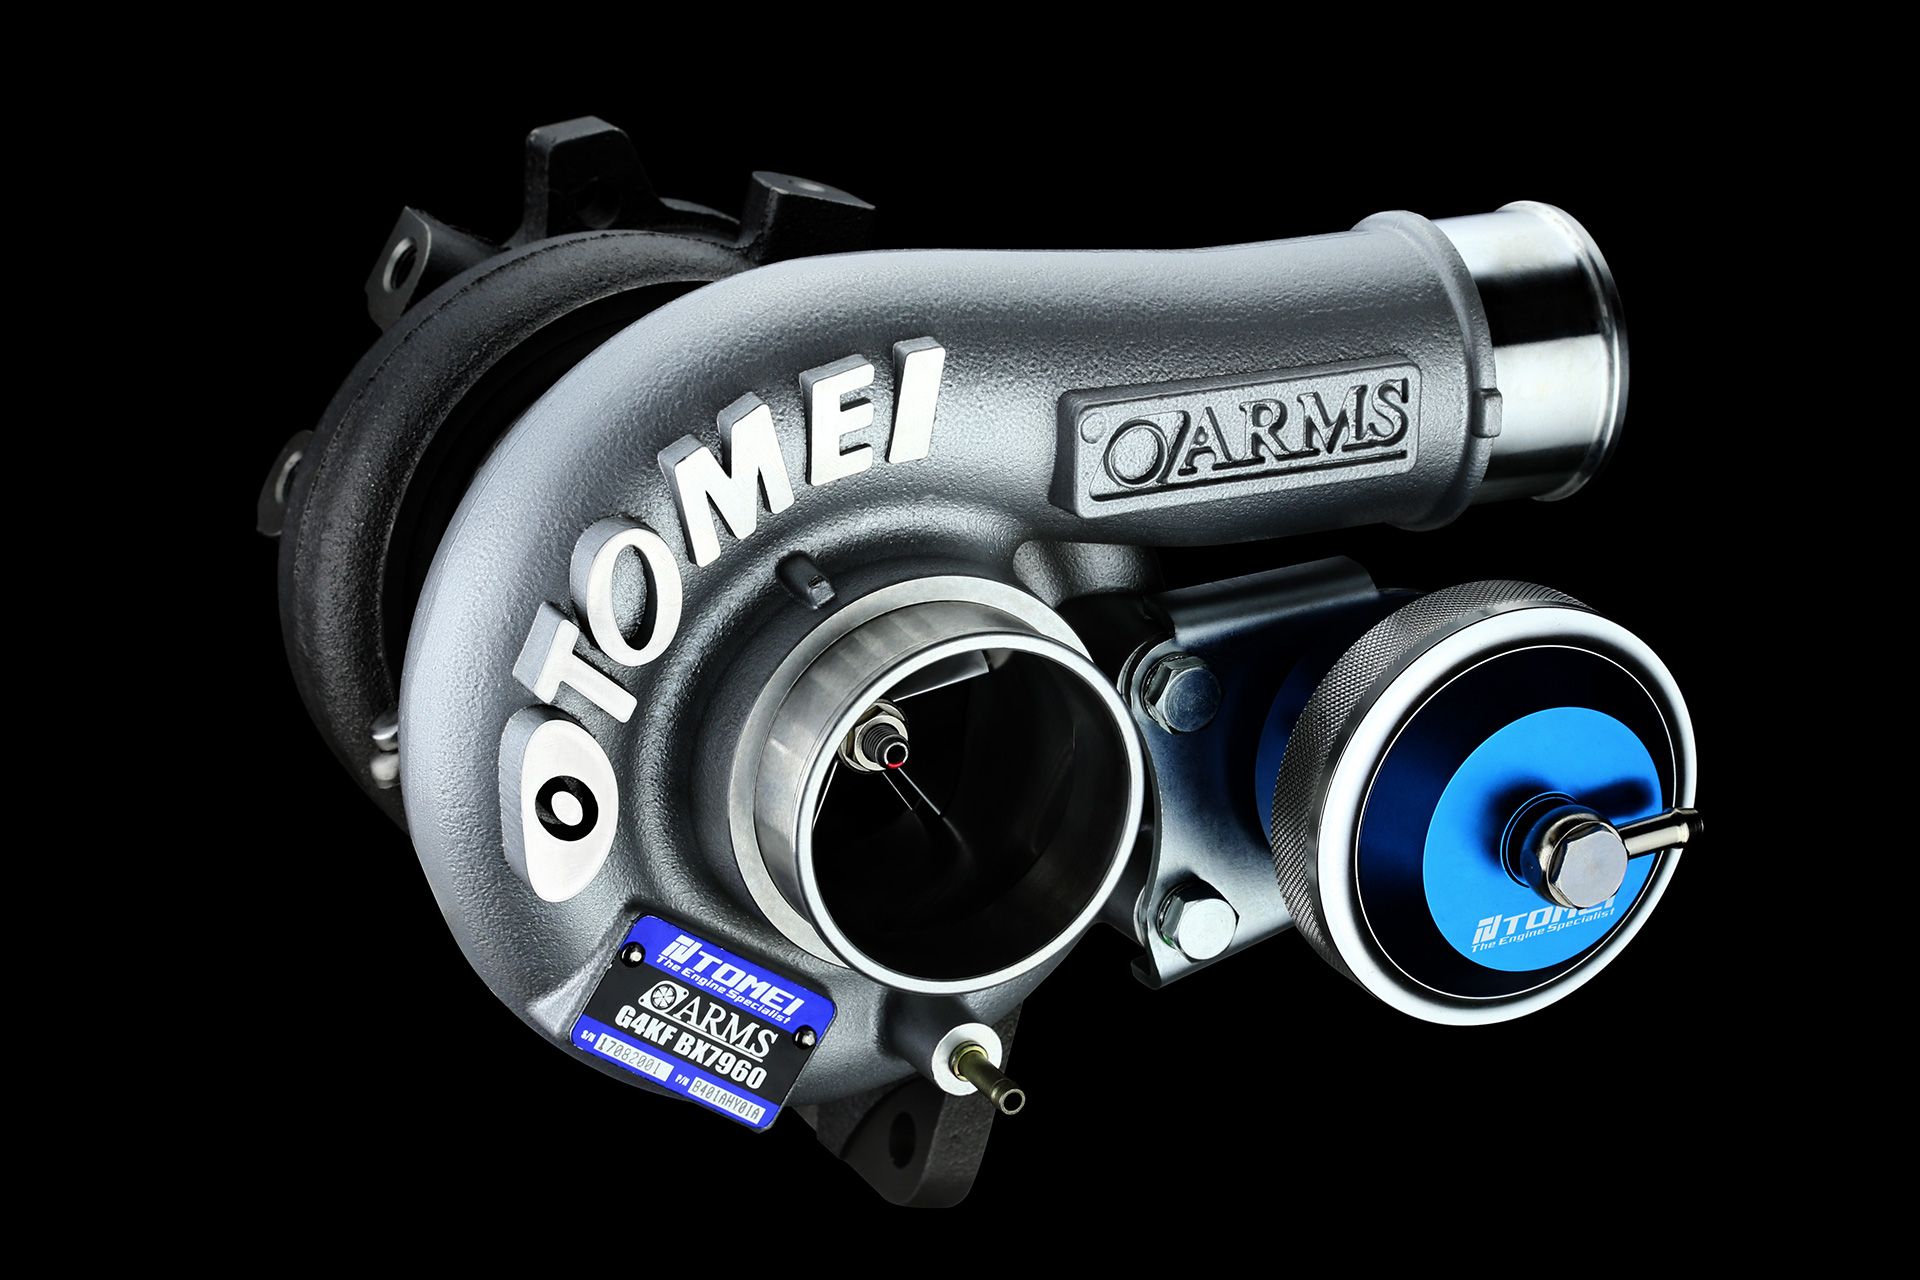 Tomei B/B Turbocharger Kit  Arms BX7960 G4KF Genesis Coupe 2.0T